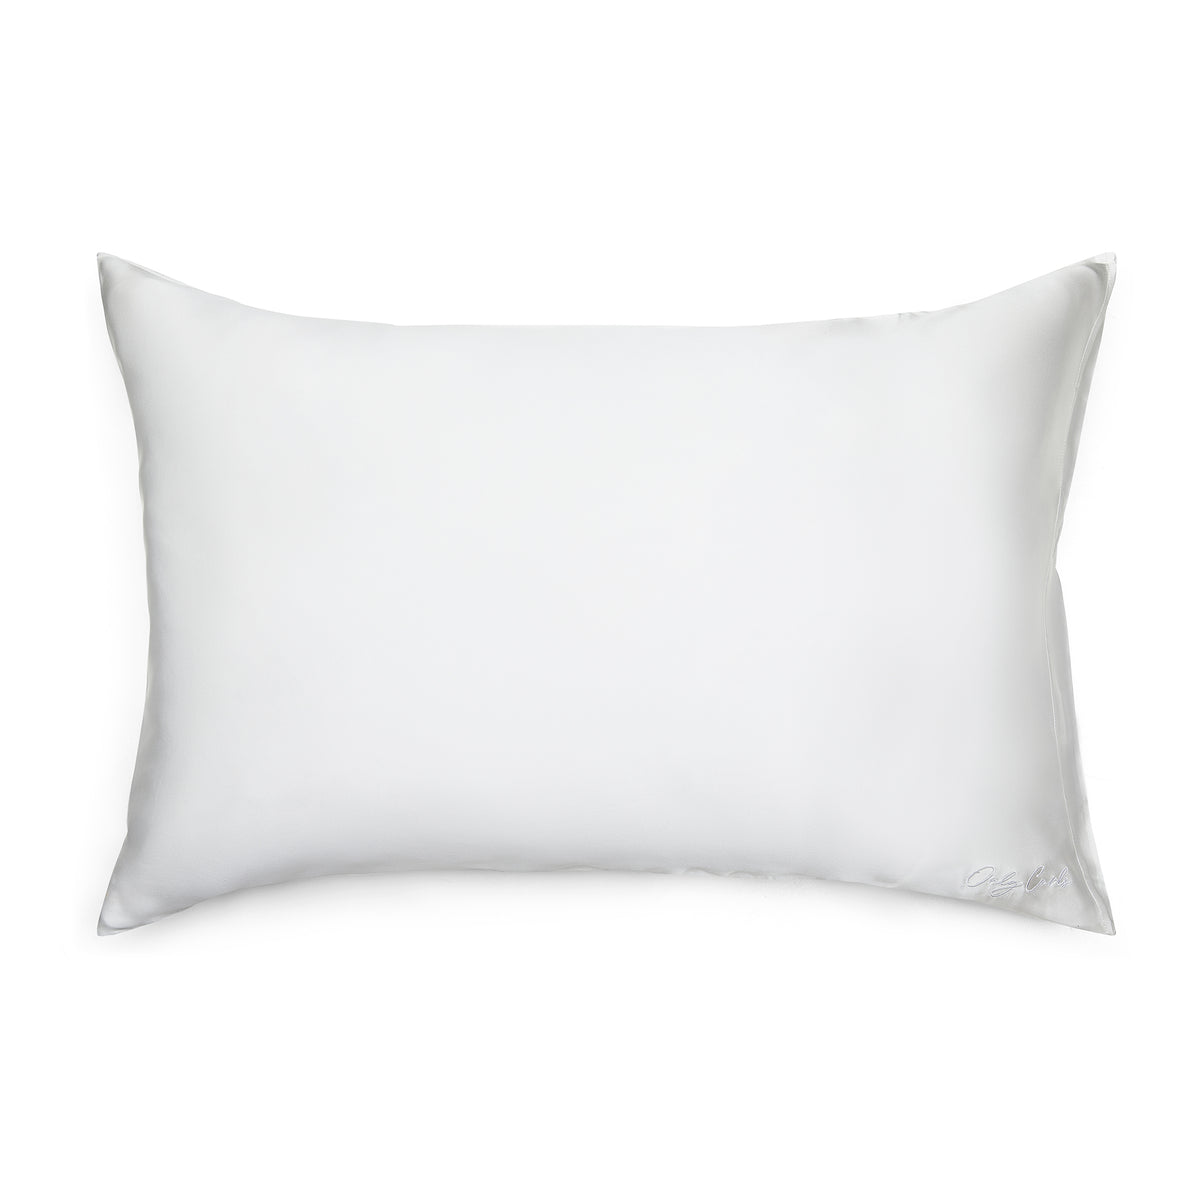 Only Curls Silk Pillowcase - White - Only Curls